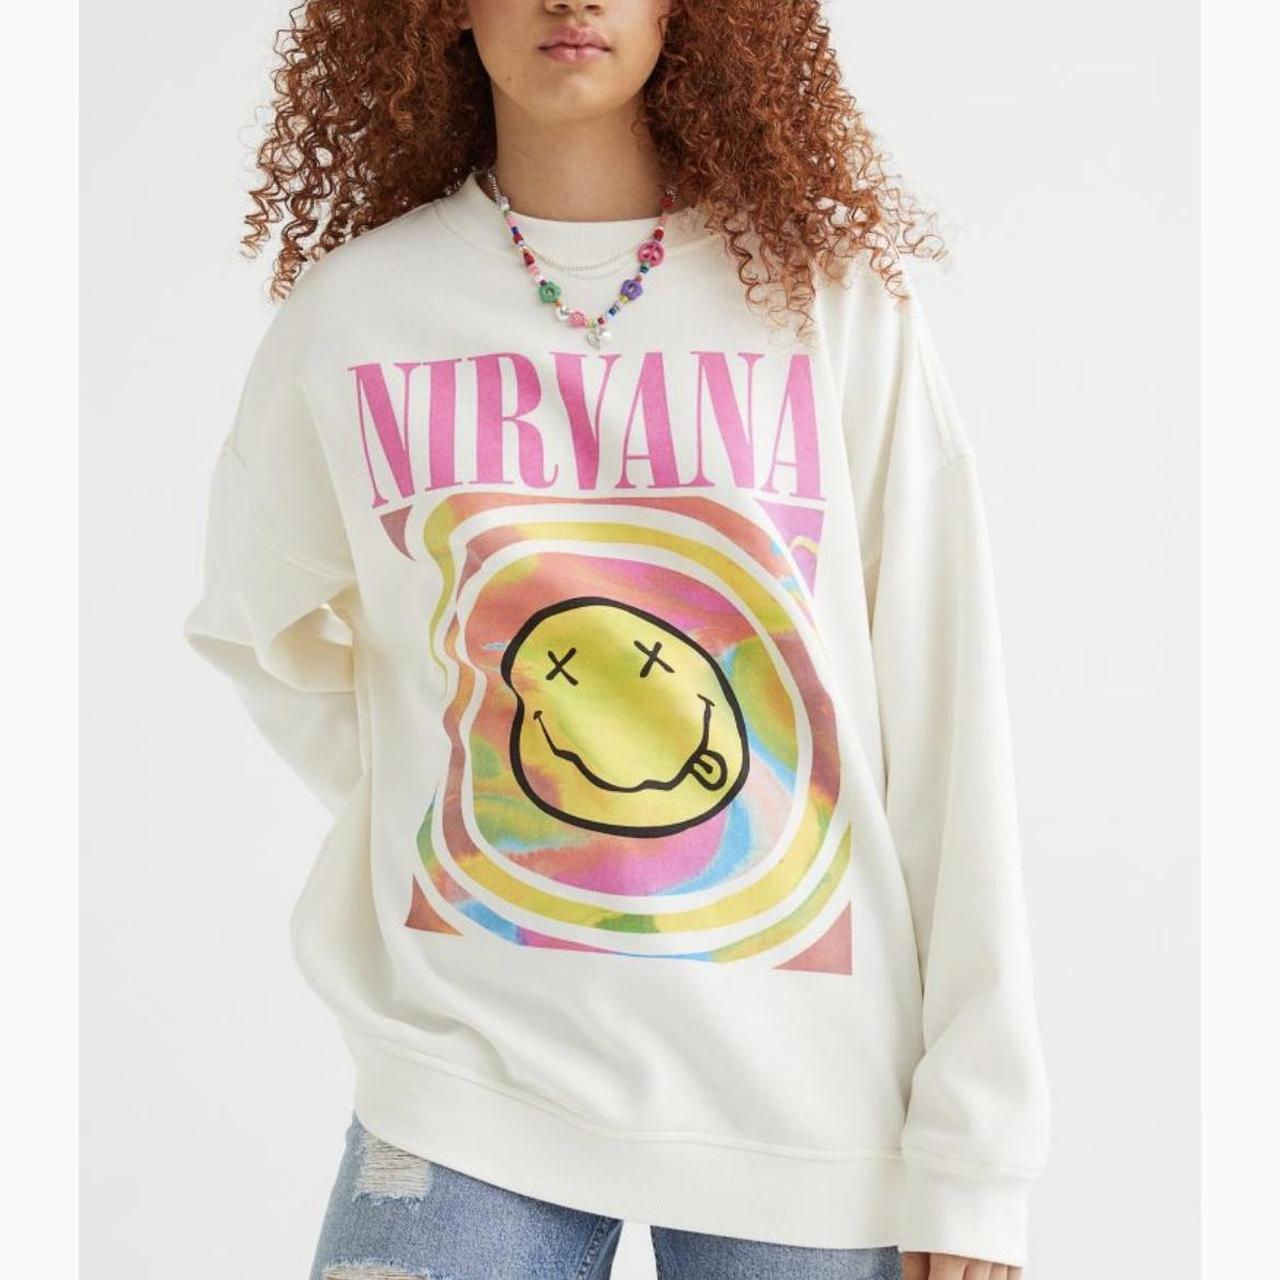 Nirvana oversized white crew - sold out on website-... - Depop